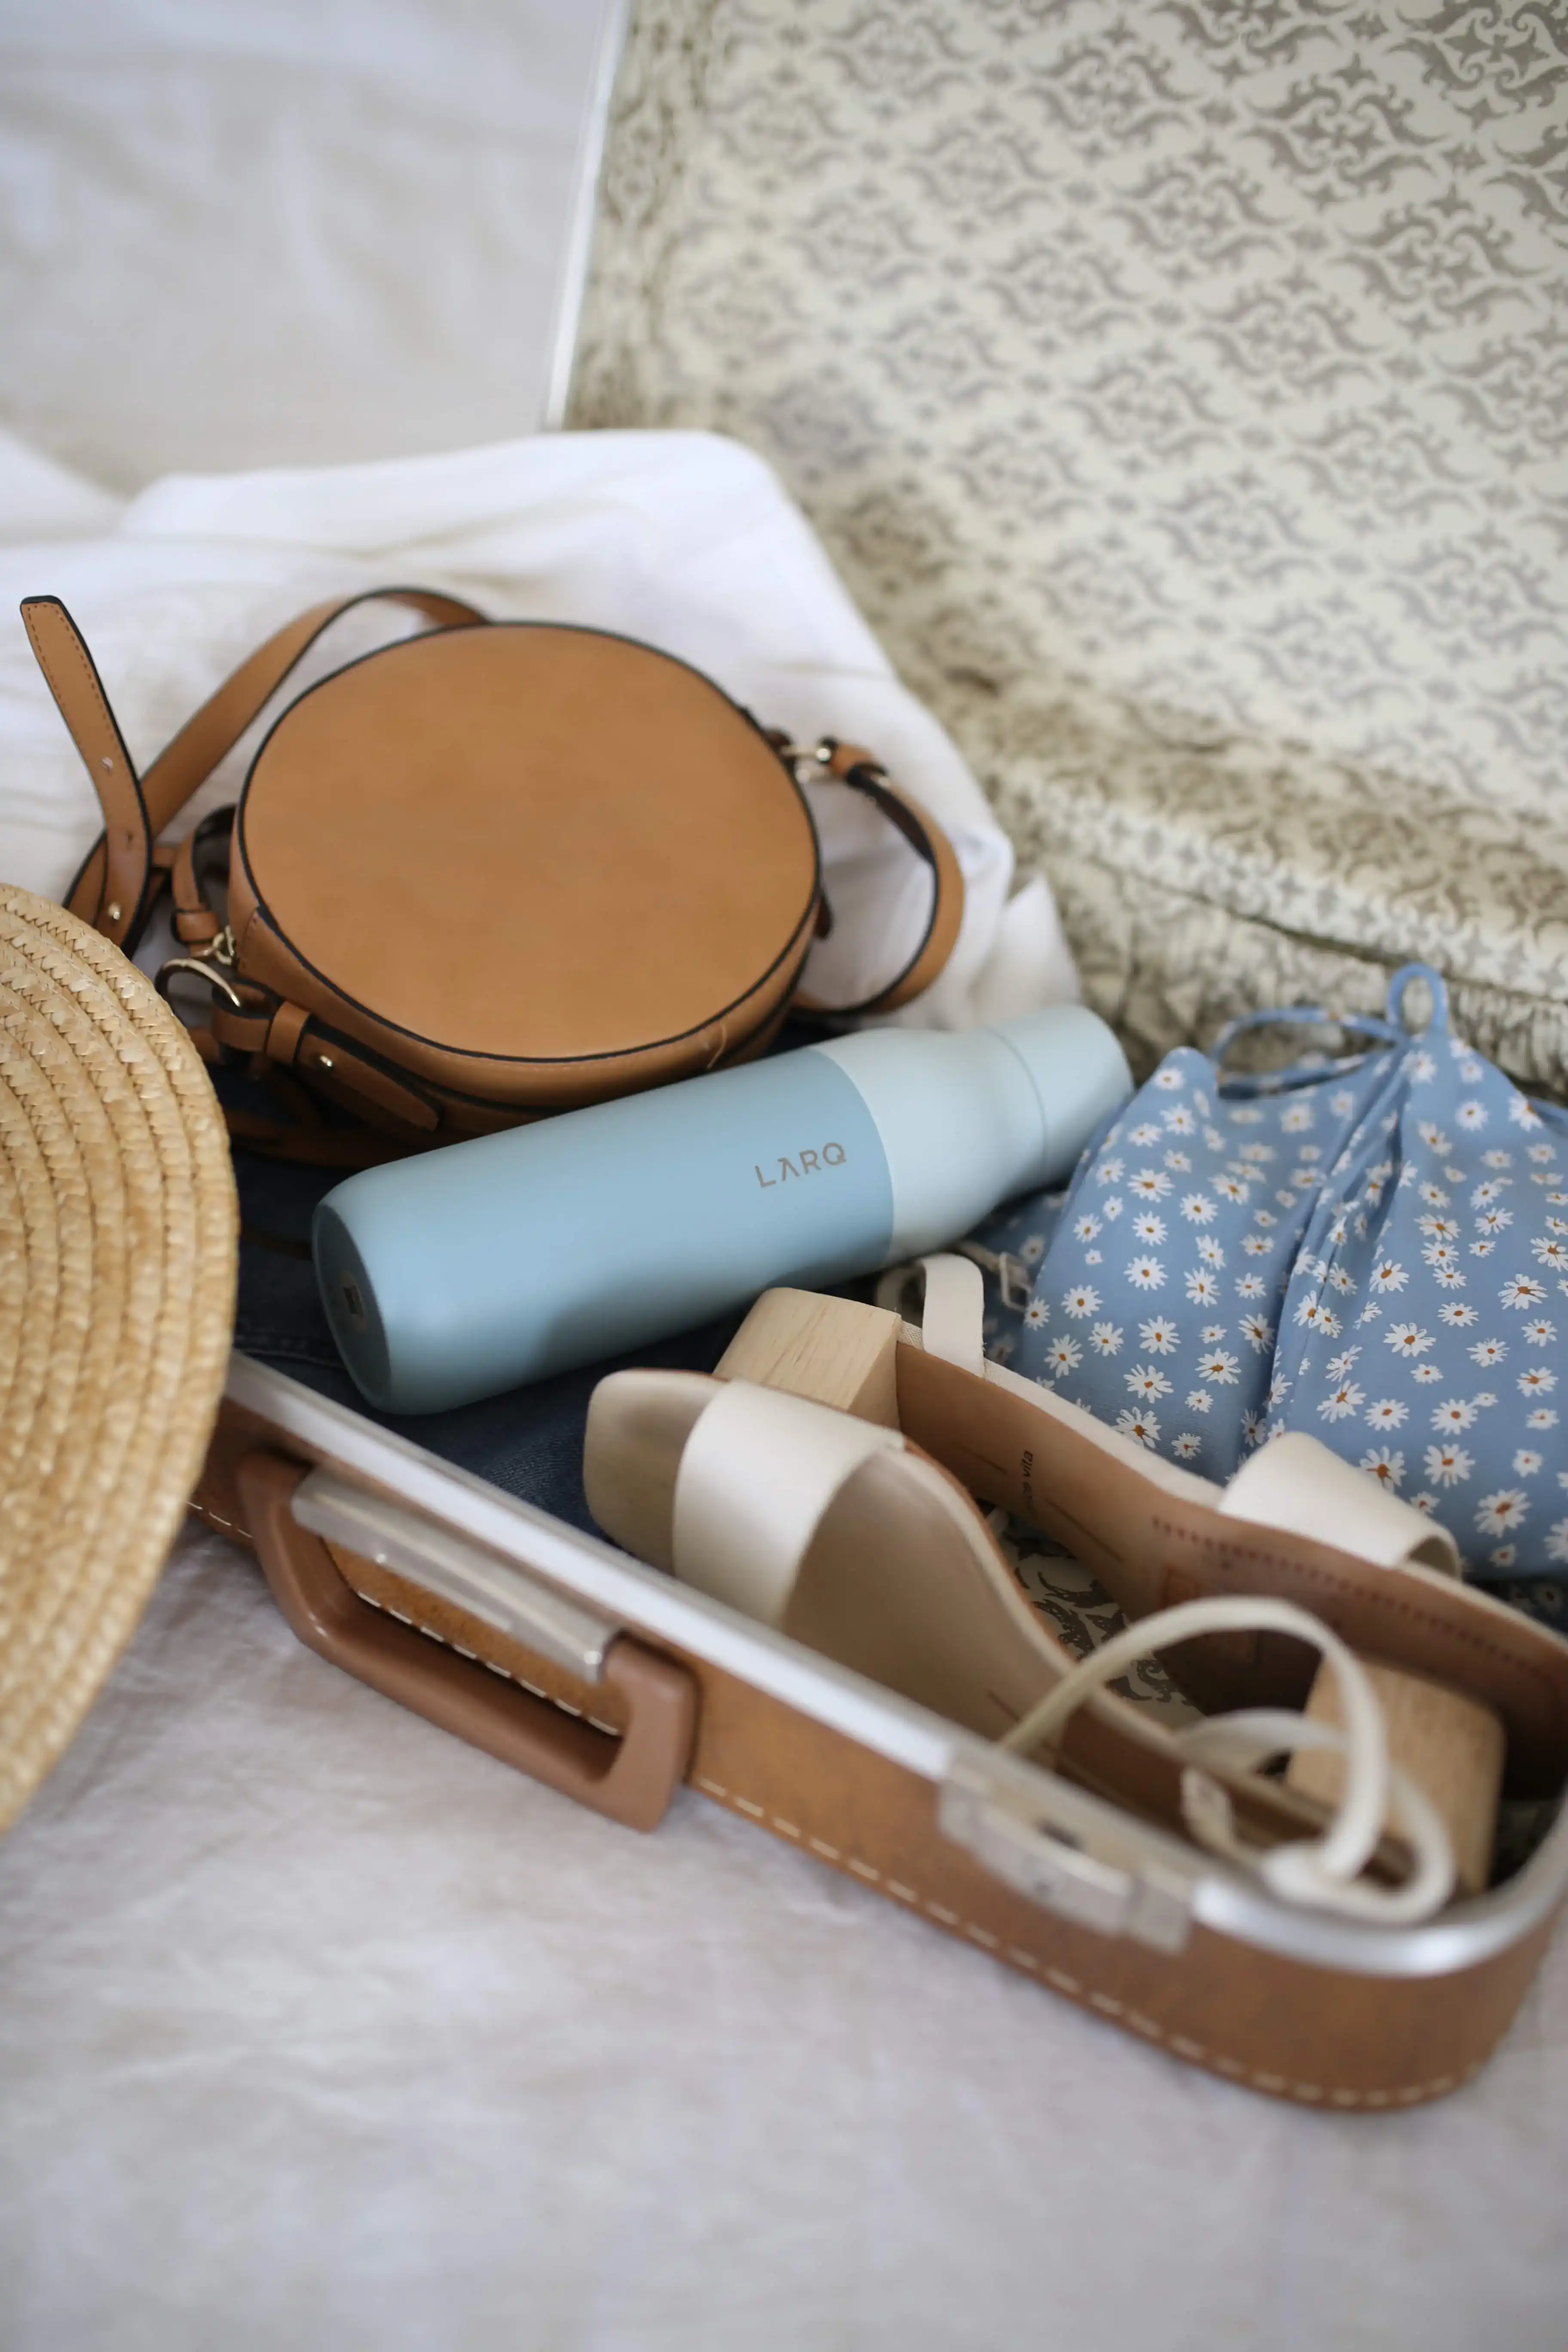 Travel Smart: Packing List and Travel Accessories for Stress-Free Adventures